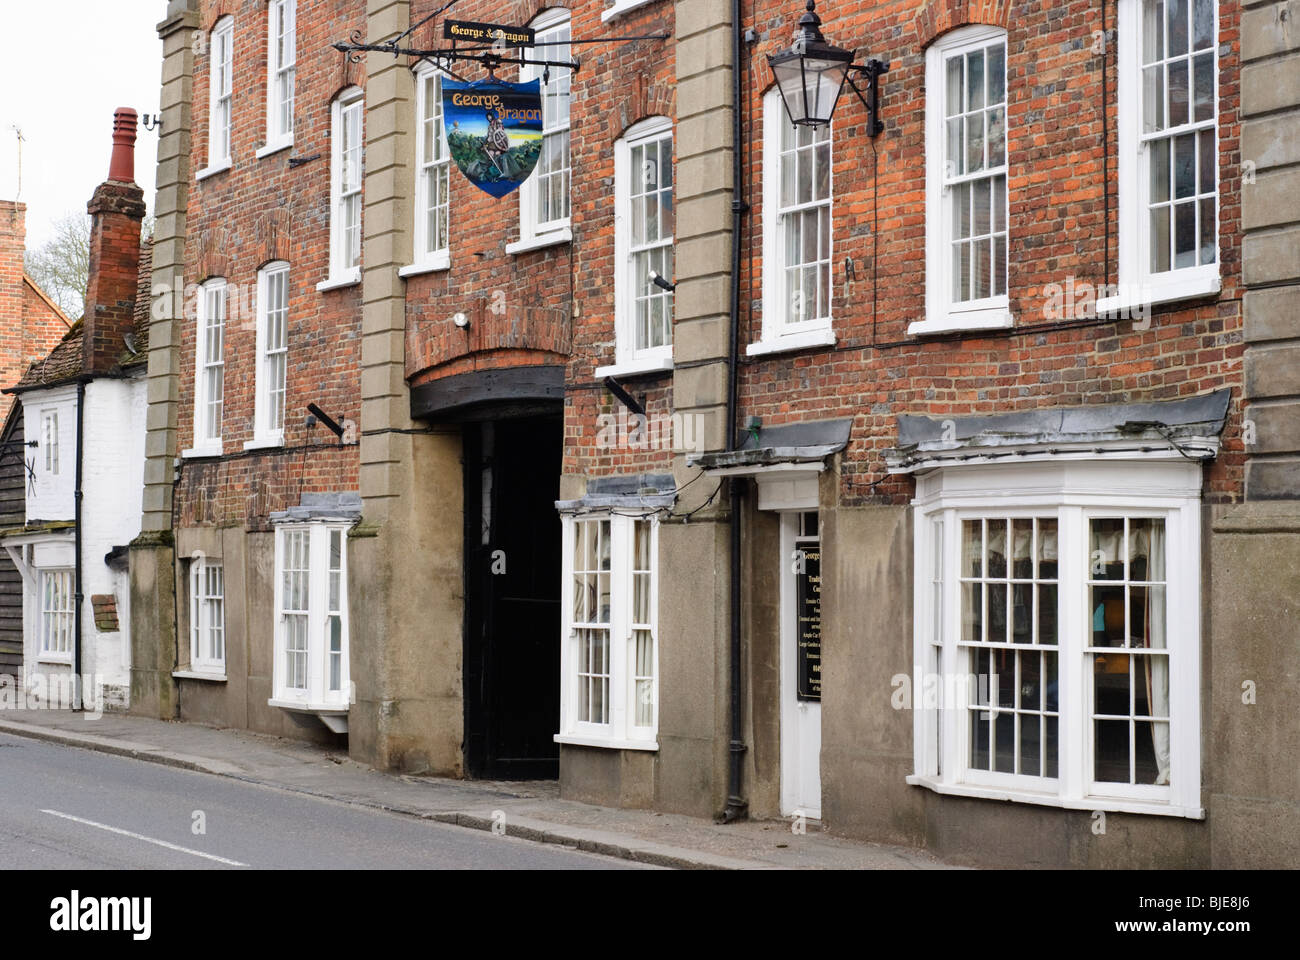 The historic George and Dragon pub at West Wycombe, Buckinghamshire, England, UK, Europe. Stock Photo